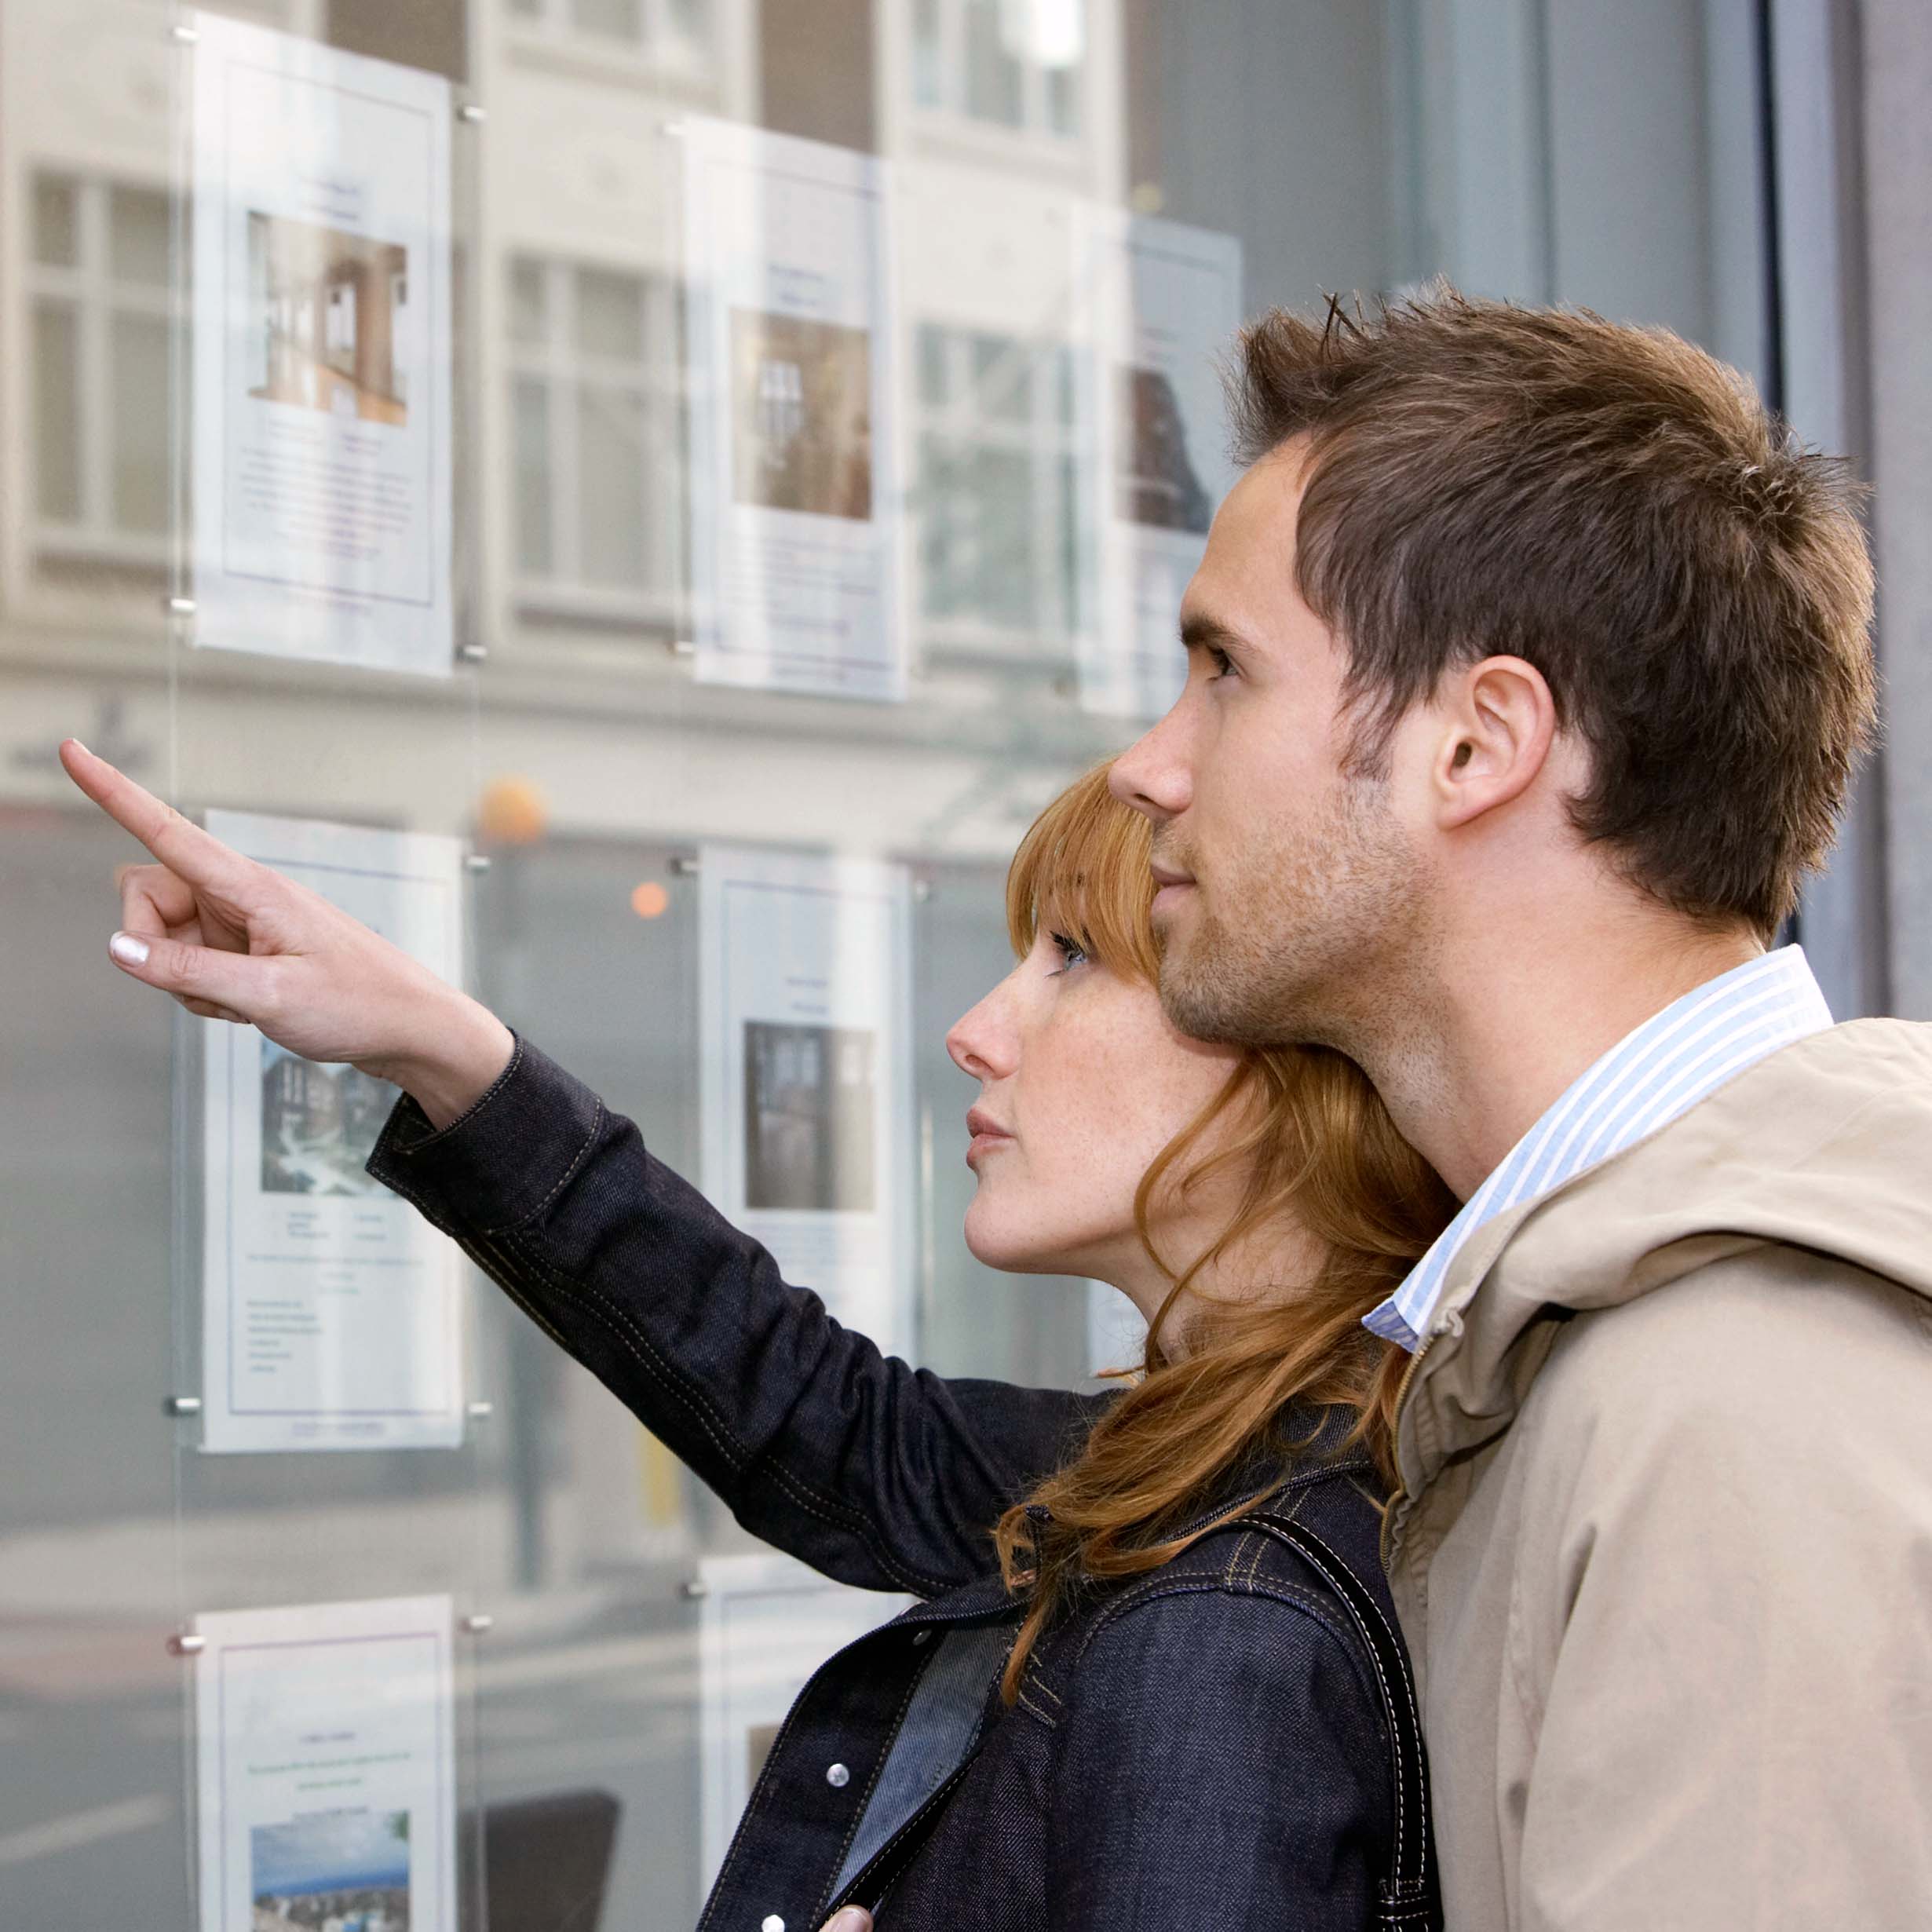 Couple looking at possible estate agents to pick for their own property sale